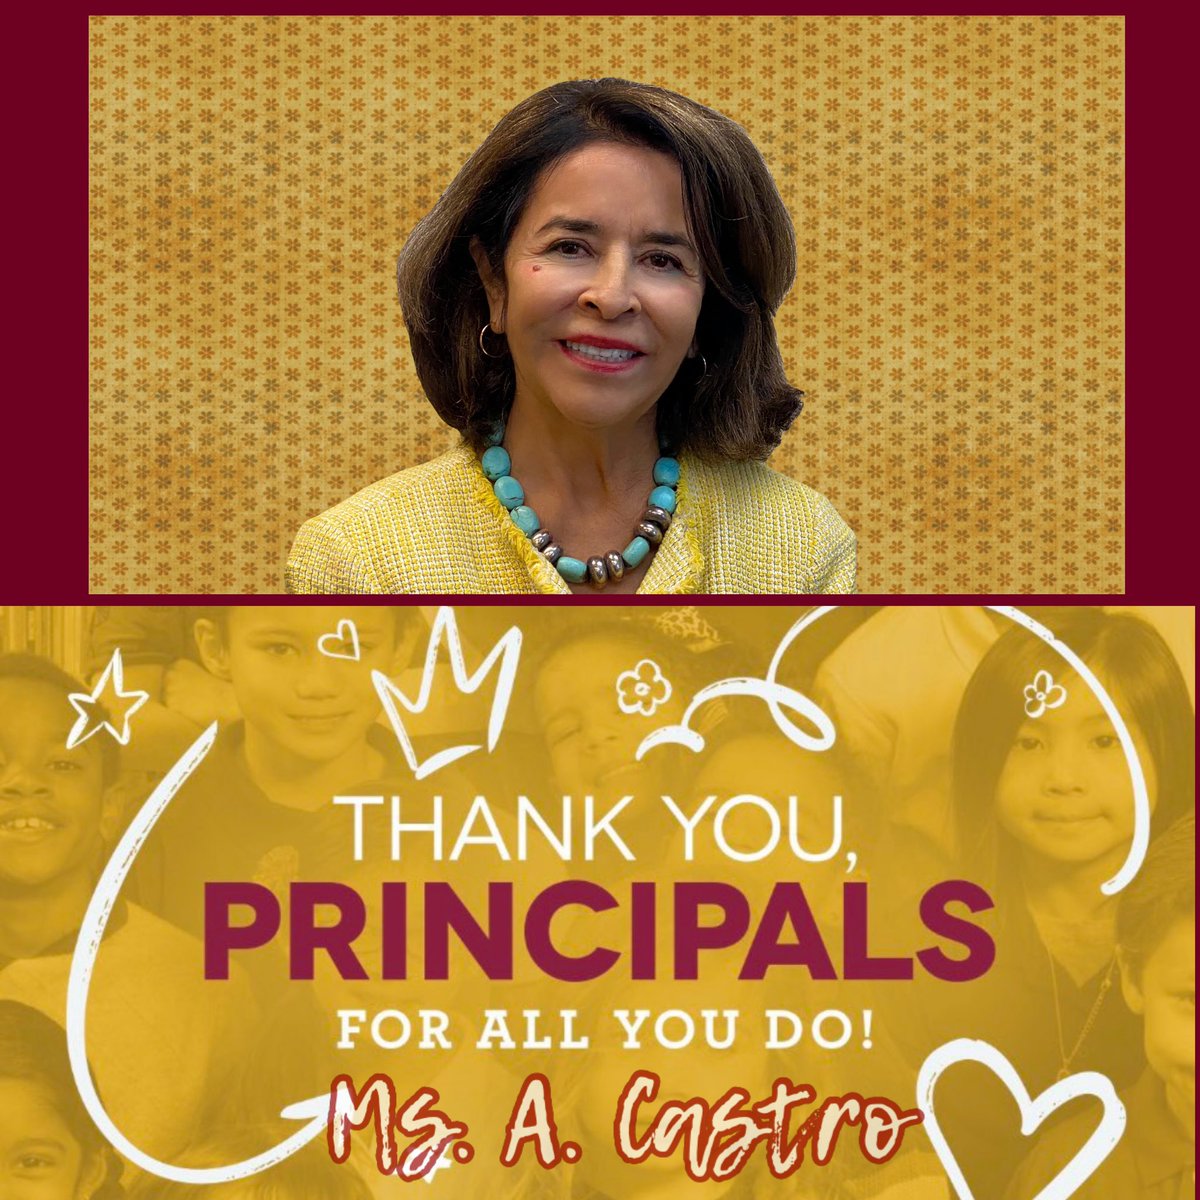 Happy National Principals Month to our amazing leader Ms. Adriana Castro @acastro_hisd. Thank you for your leadership, commitment, & all the love to our @MorenoMustangs community. We❤️you Ms. Castro! @elipadi67 @IlsaAVillarreal @Ms_JChavez @TeamHISD @HoustonISD #ThankAPrincipal